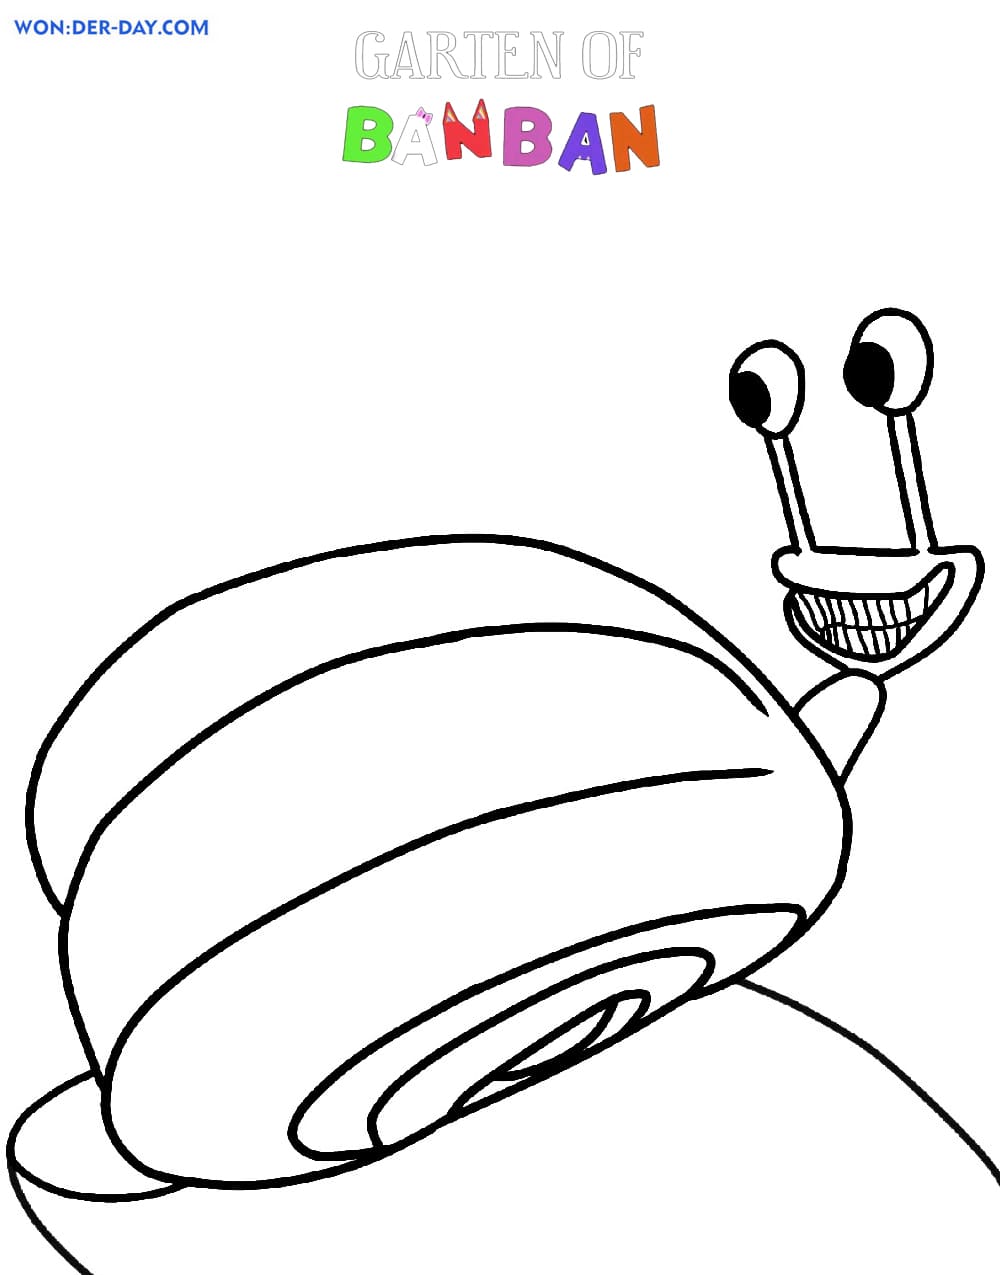 Garten Of Banban New Coloring Pages / How to Color All Monsters